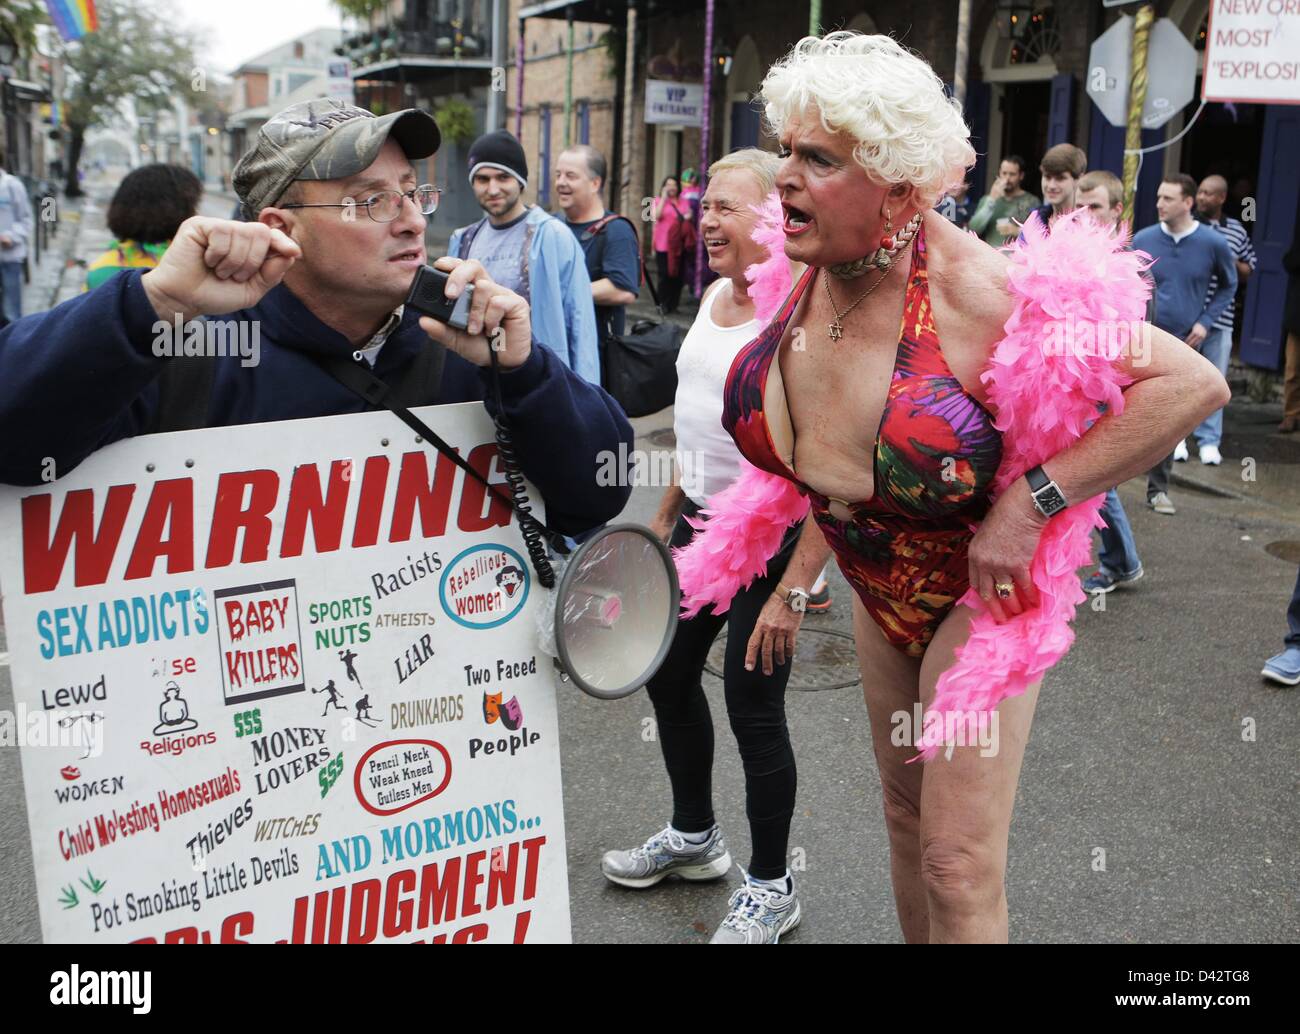 Feb. 12, 2013 - New Orleans, LOUISIANA, UNITED STATES - (left to right) A Christian Street preachers yells at a group hanging outside of a bar while drag queen Charles Loraine Wendell yells back on Bourbon Street in the French Quarter during Fat Tuesday Mardi Gras celebrations in New Orleans, Louisiana USA on February 12, 2013.  Fat Tuesday concludes the Mardi Gras celebrations throughout the Gulf Coast. (Credit Image: © Dan Anderson/ZUMAPRESS.com) Stock Photo